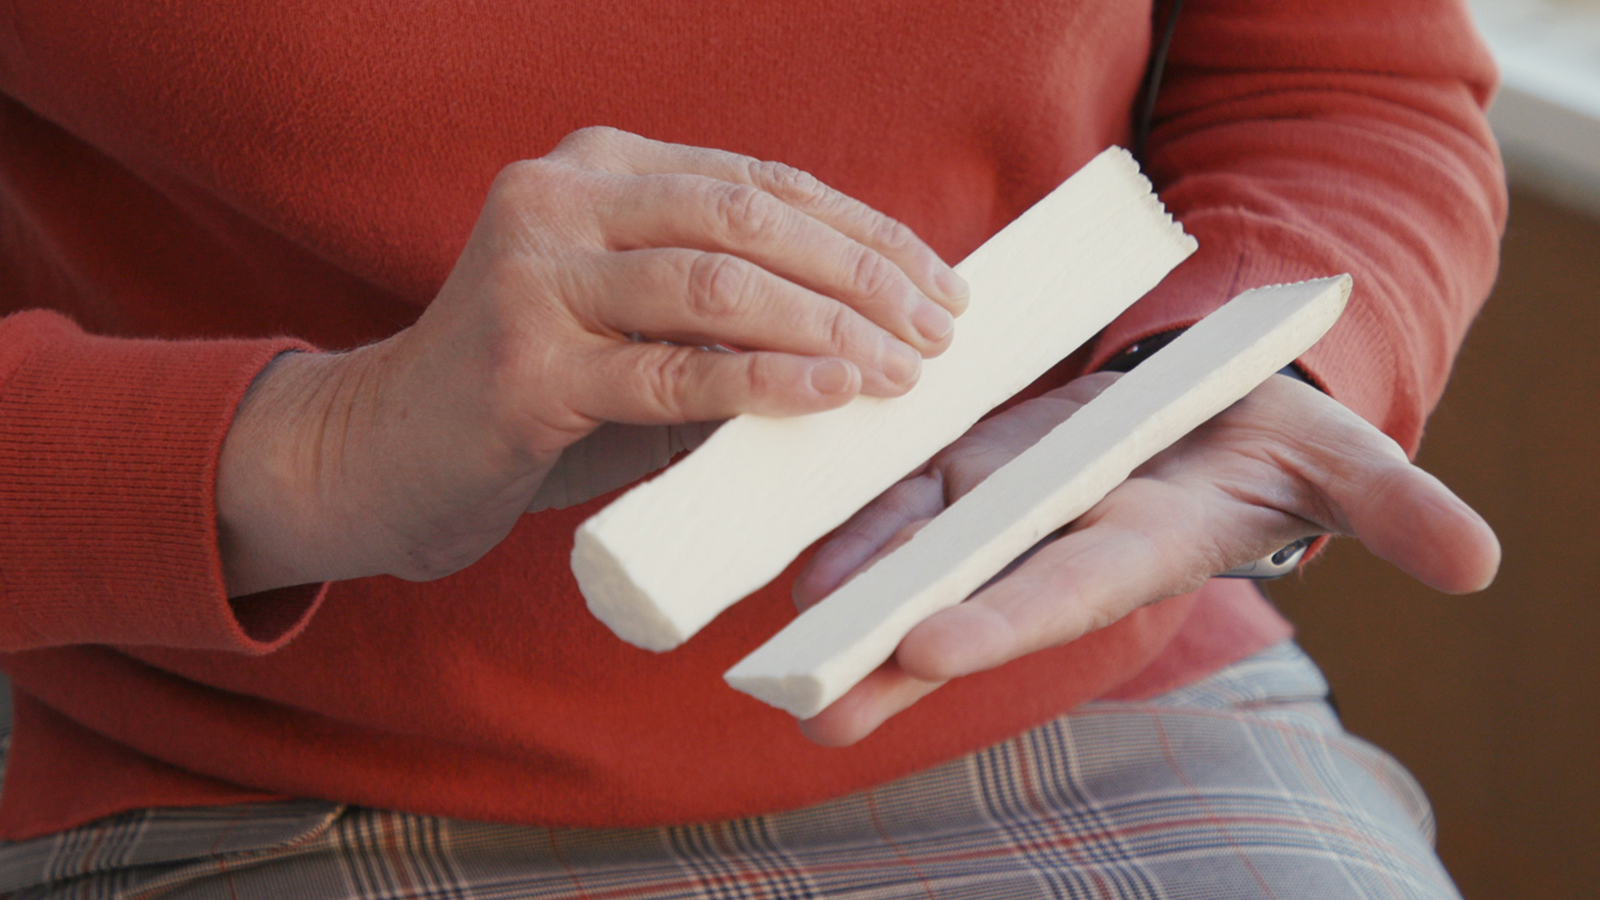 a person holds a white stick split in half with bands along the long inner cut